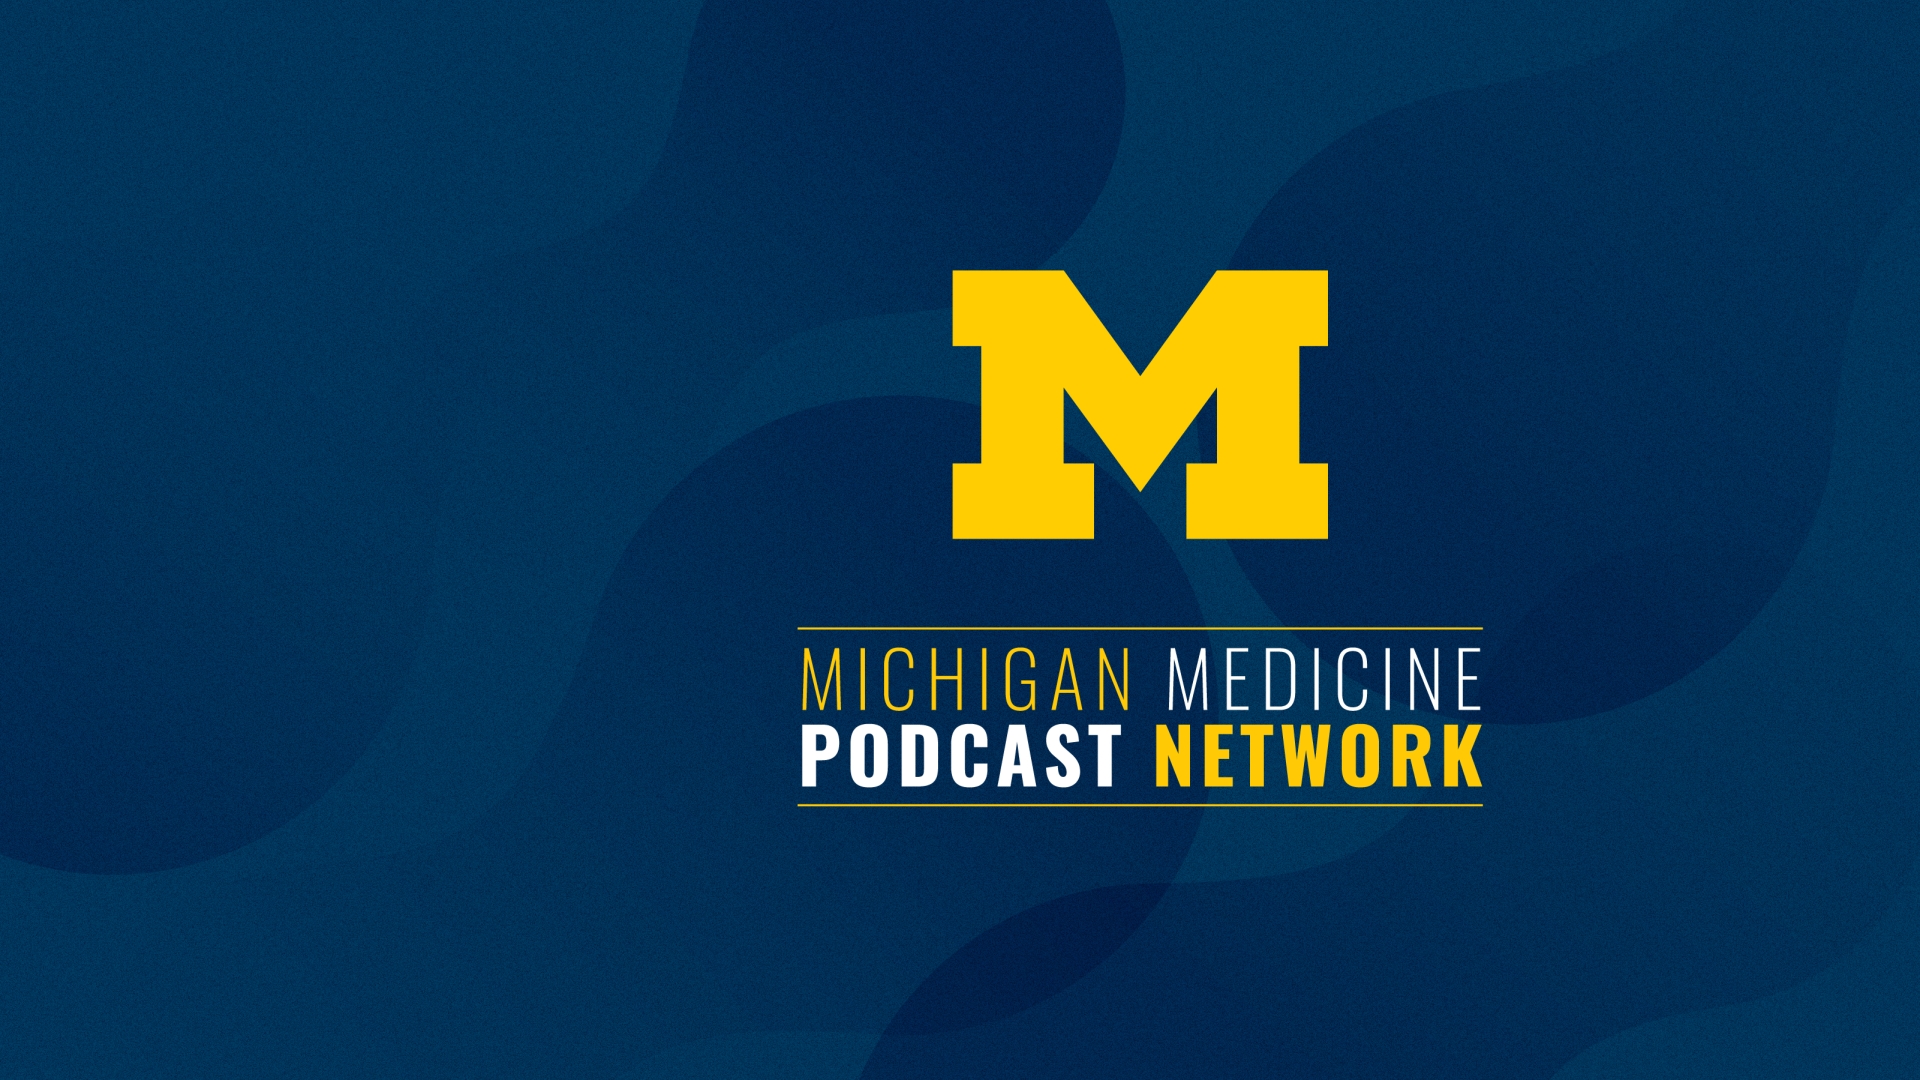 Block M with Michigan Medicine Podcast Network underneath in yellow on a blue background